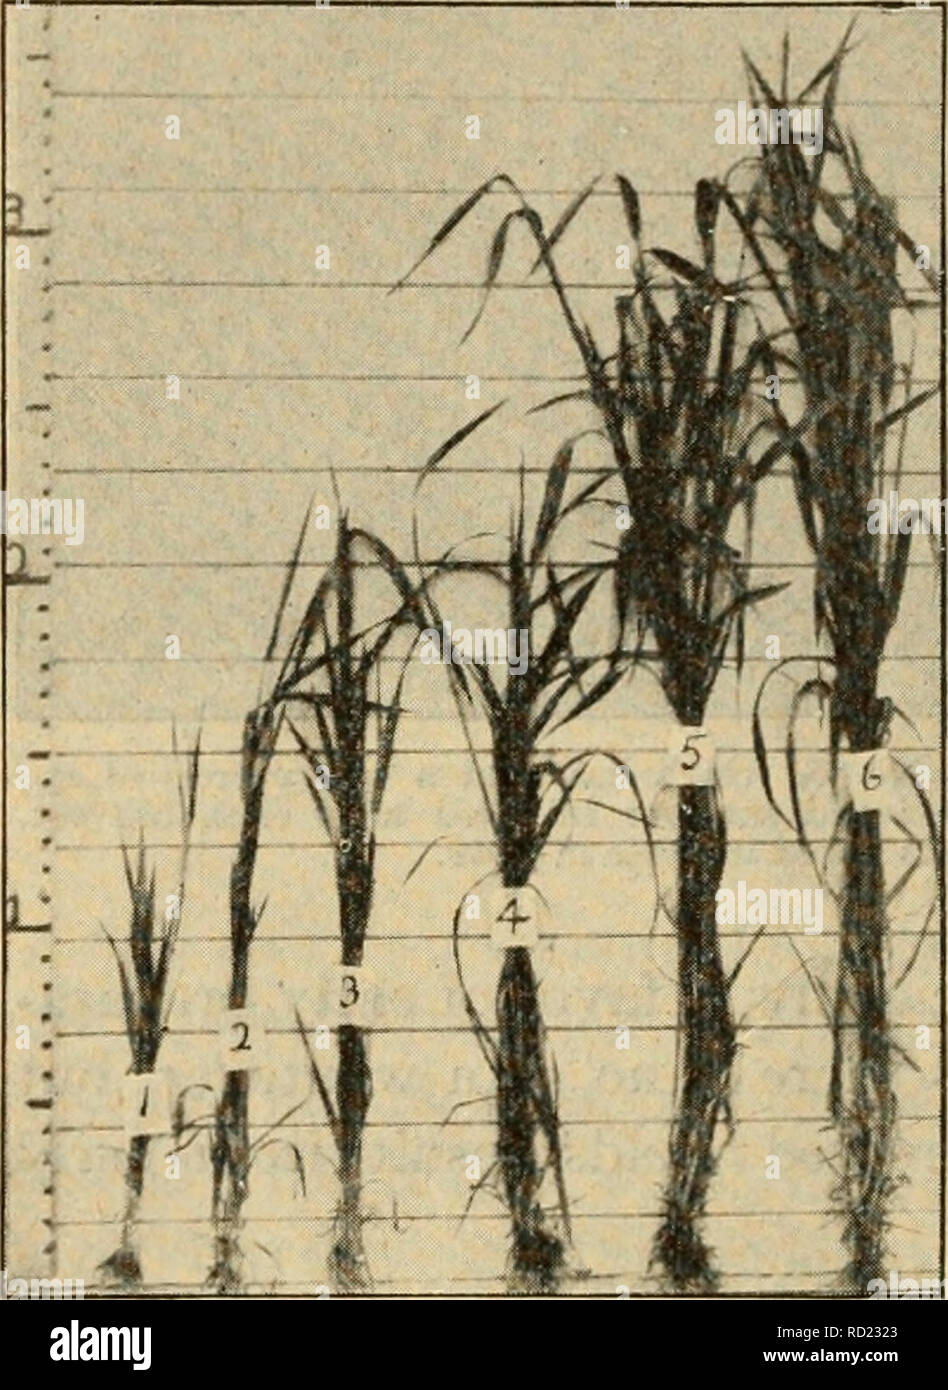 . Elementary principles of agriculture : a text book for the common schools. Agriculture. 312 Elementary Principles of Agriculture 449. Green Manuring. (See ^ 131). Prof. Shaw of the Cahfornia Experiment Station, reports the following results which show the possibilities of deep plowing, and a single green manur- ing on sandy soils naturally lacking in the qualities that humus gives. First a number of plots were summer fallowed, and in the fall plowed to a depth of 6 inches, harrowed and seeded as indicated in the table, except No. 1, which was so^vn to wheat continuously and only double disce Stock Photo